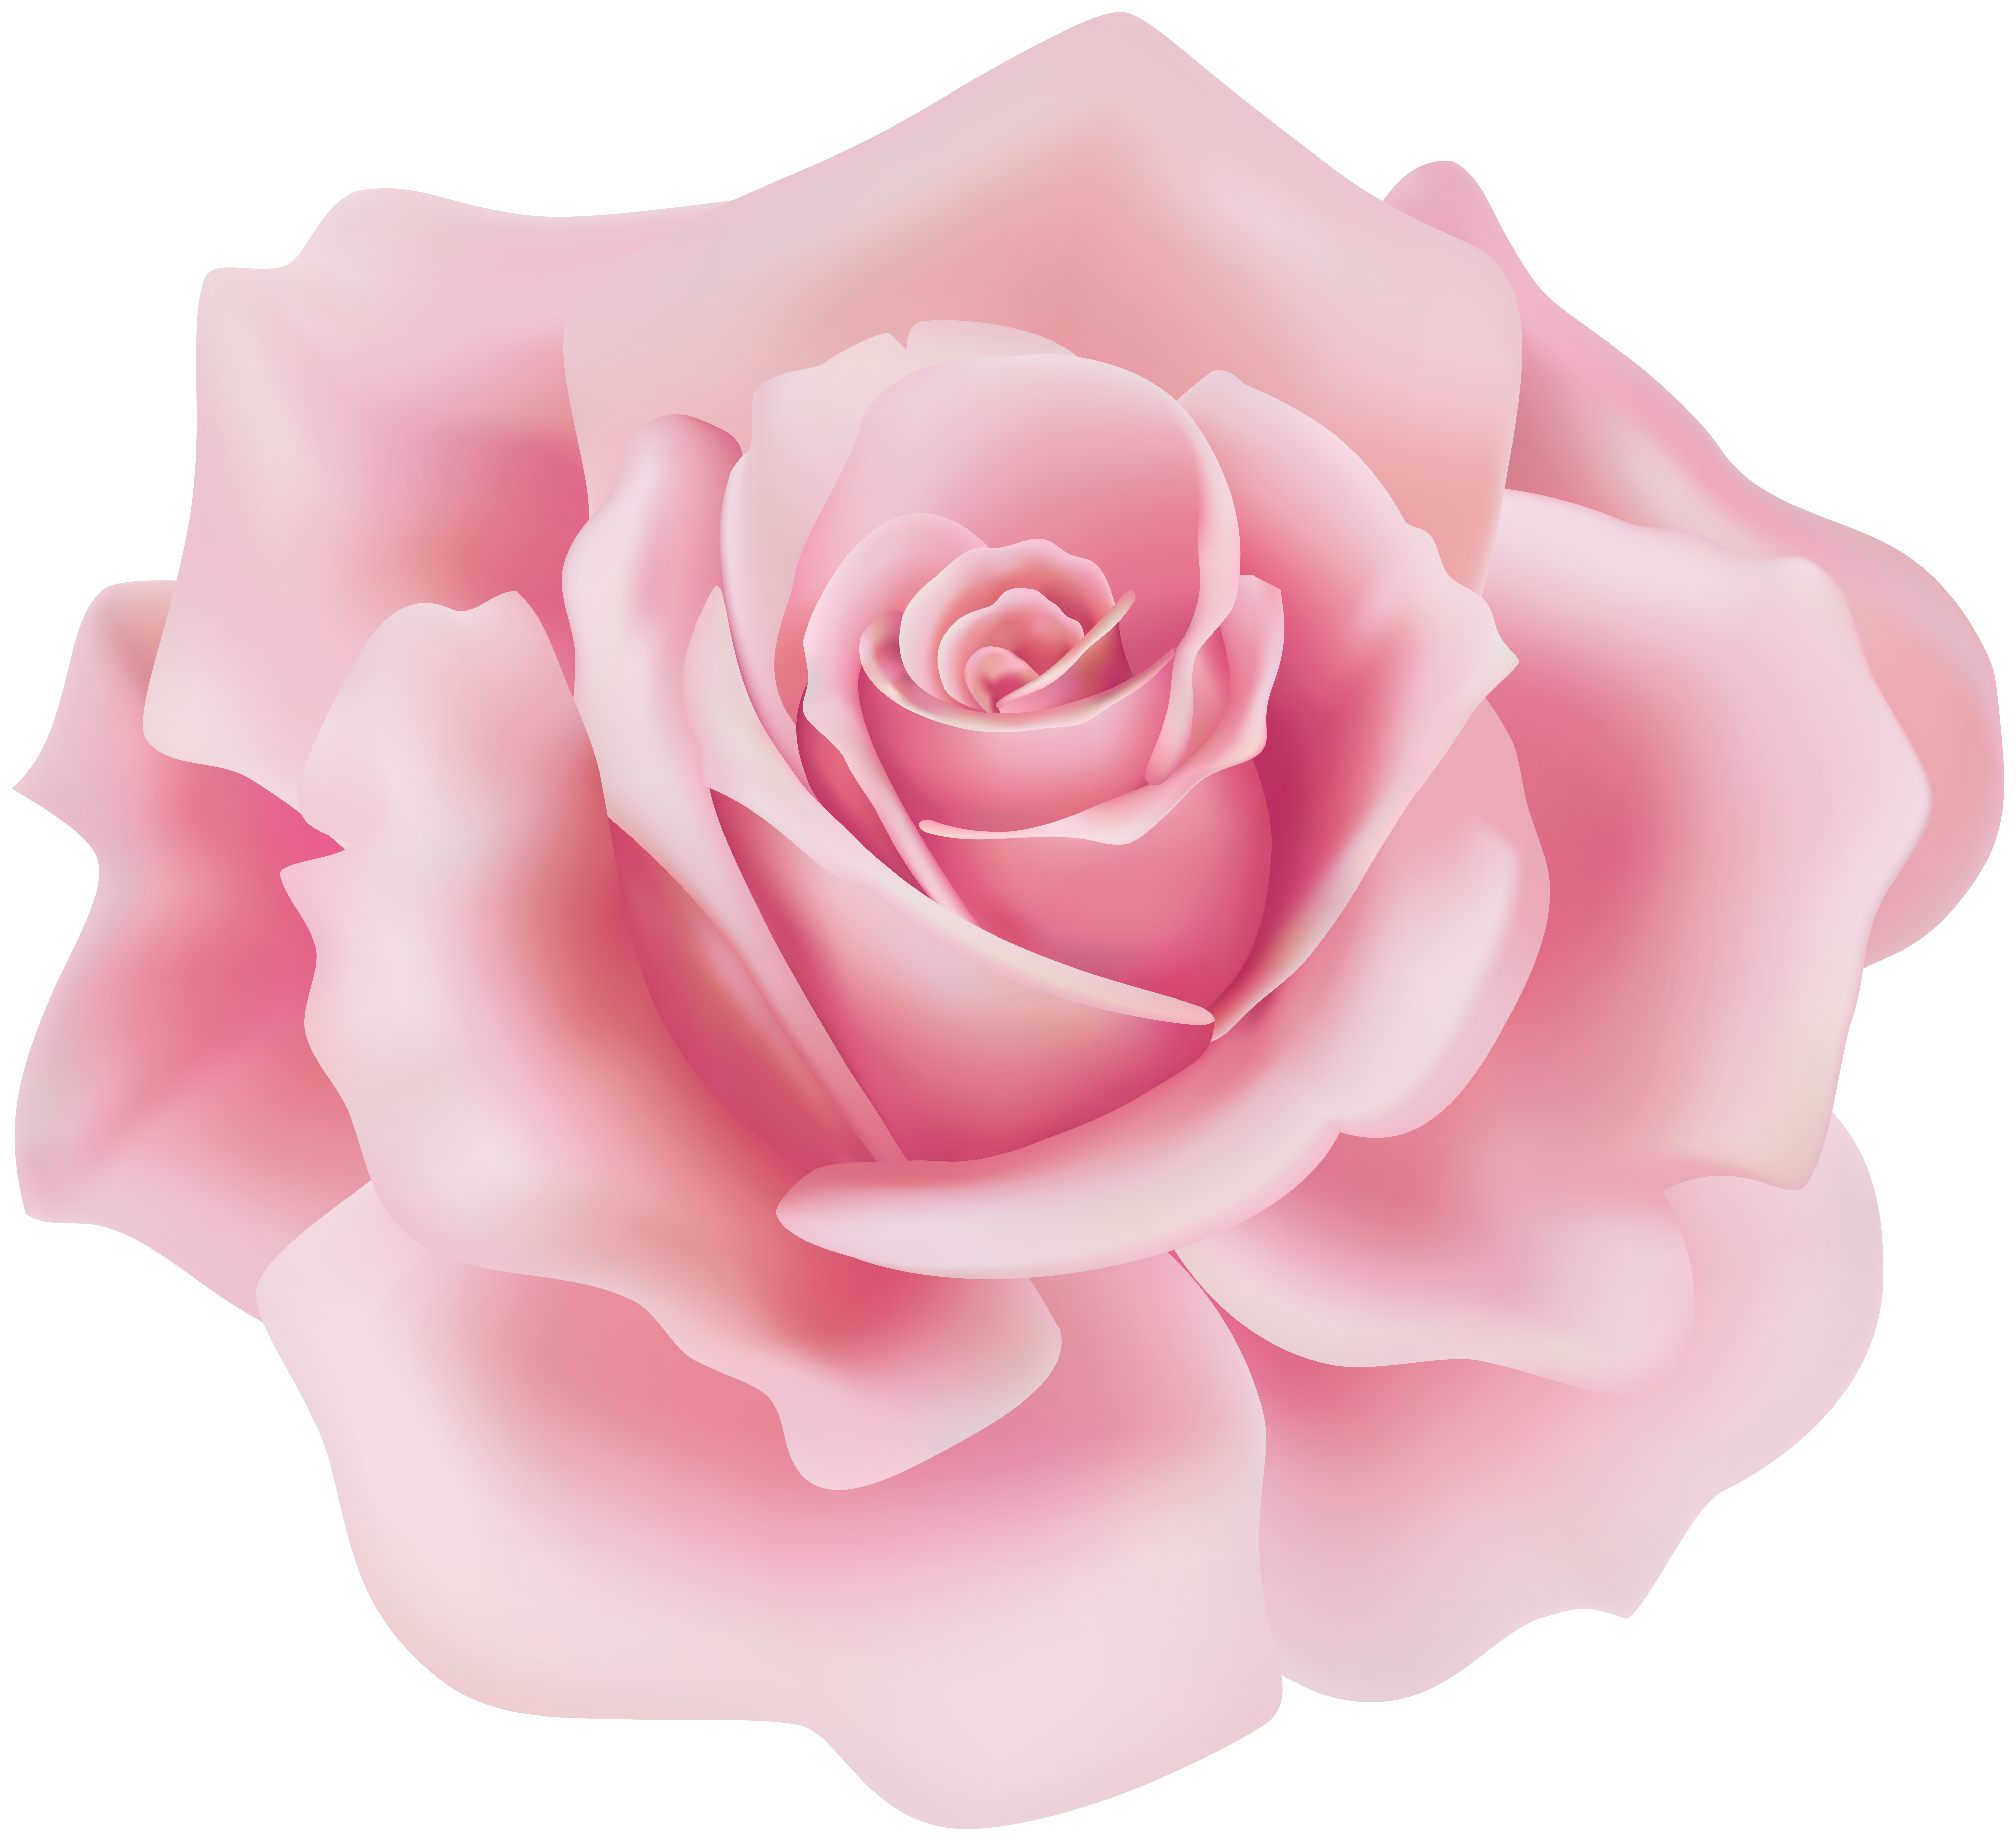 Delicate Soft Pink Rose PNG Clipart​  Gallery Yopriceville - High-Quality  Free Images and Transparent PNG Clipart